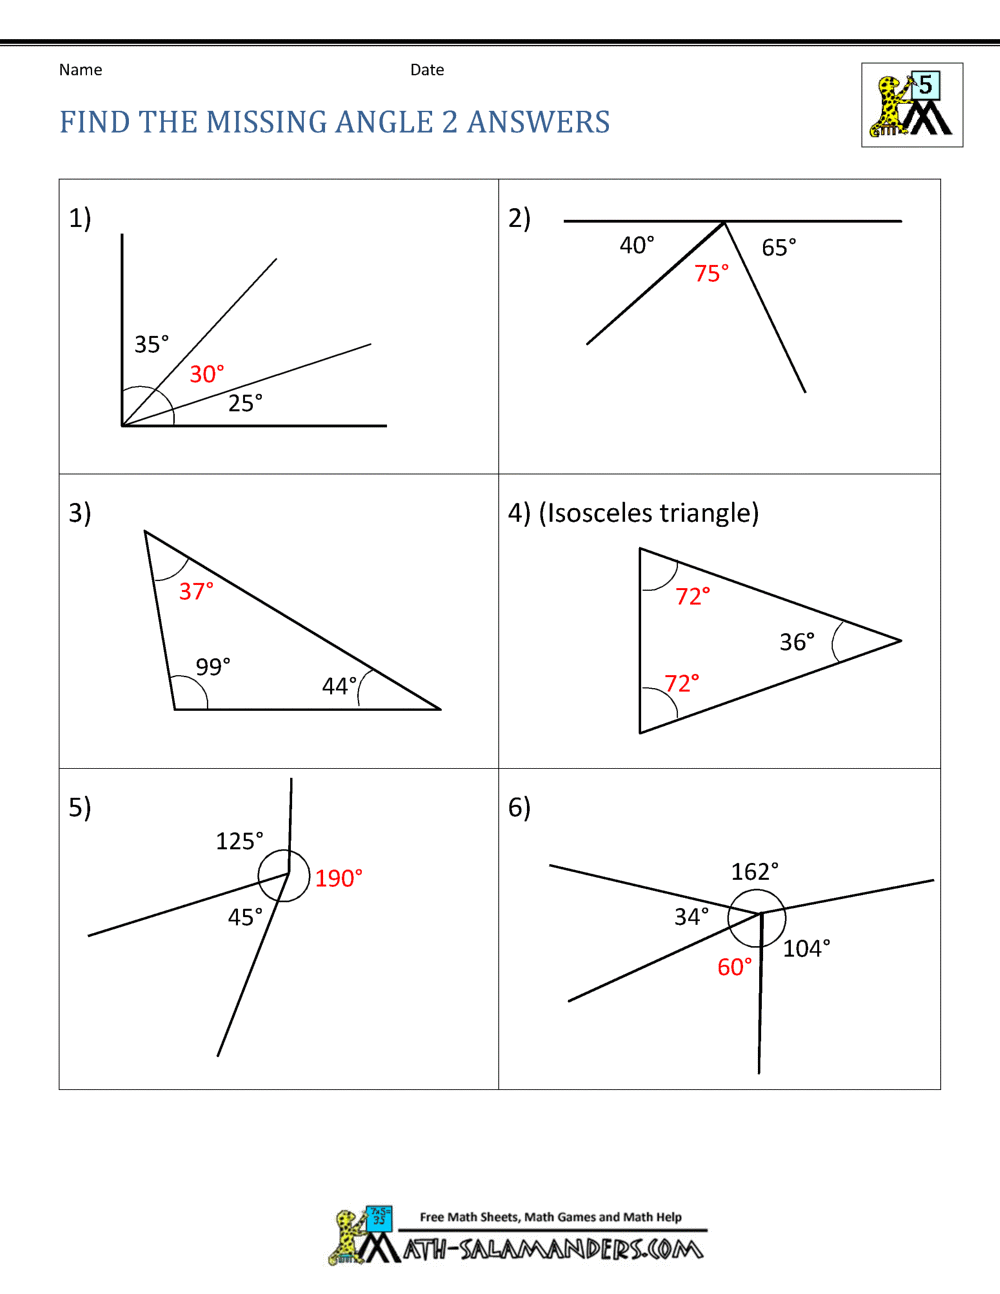 21th Grade Geometry With Regard To Finding Angle Measures Worksheet